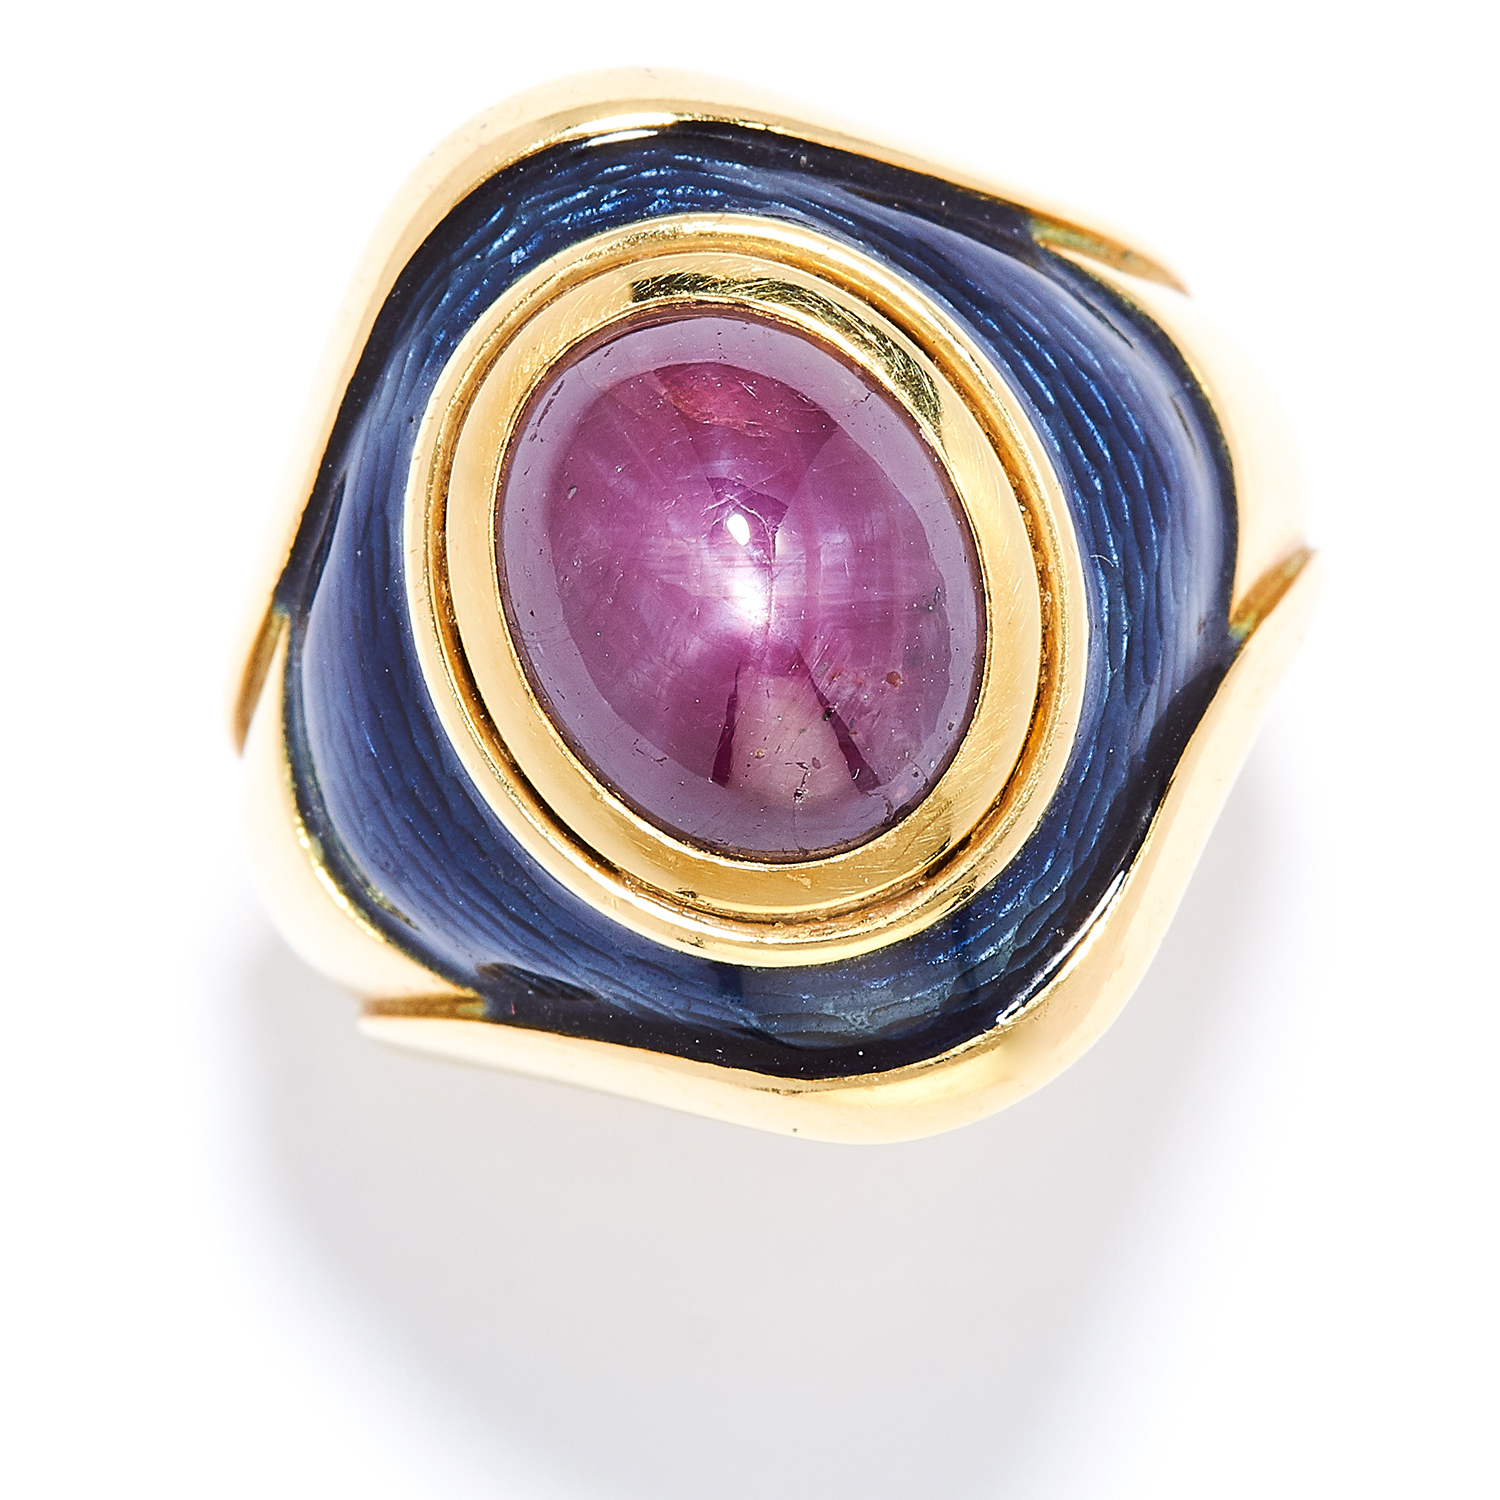 RUBY AND ENAMEL DRESS RING, DE VROOMEN in 18ct yellow gold, set with a cabochon star ruby in a